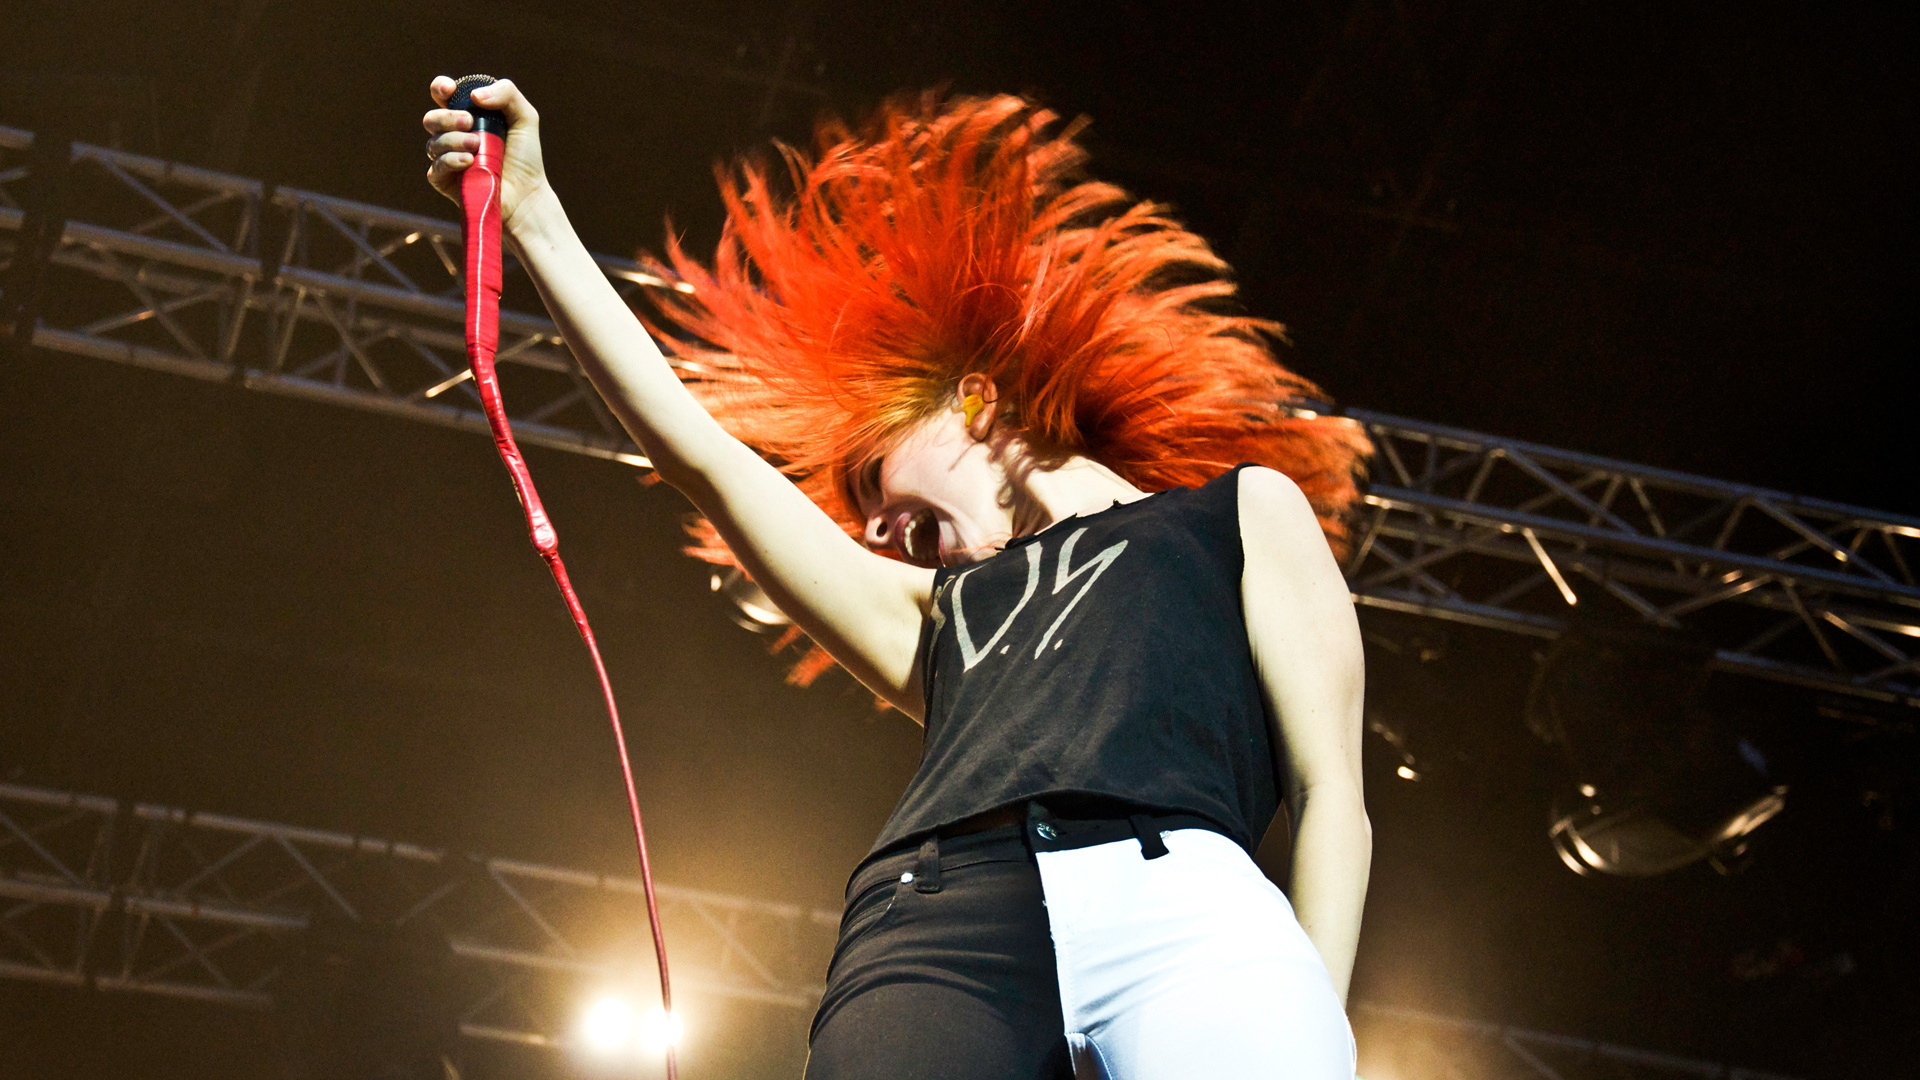 microphone, Paramore, Hayley, Williams, Hair, Red, Scene, Concert Wallpaper